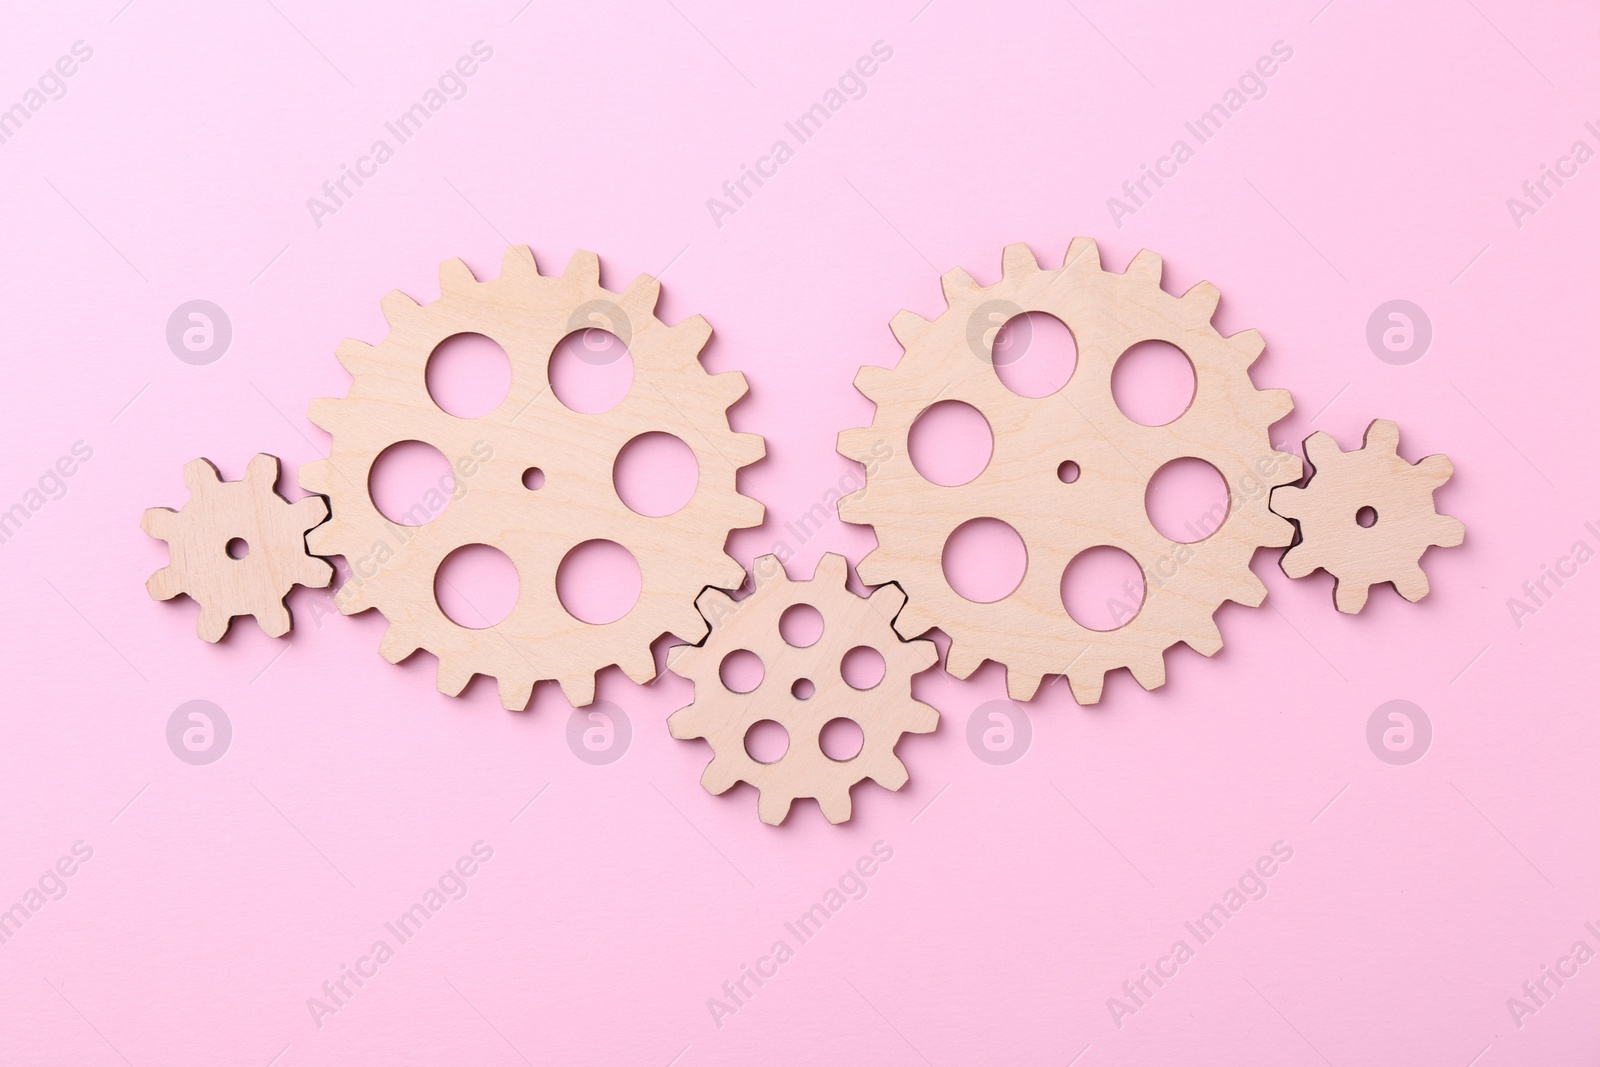 Photo of Business process organization and optimization. Scheme with wooden figures on pink background, top view